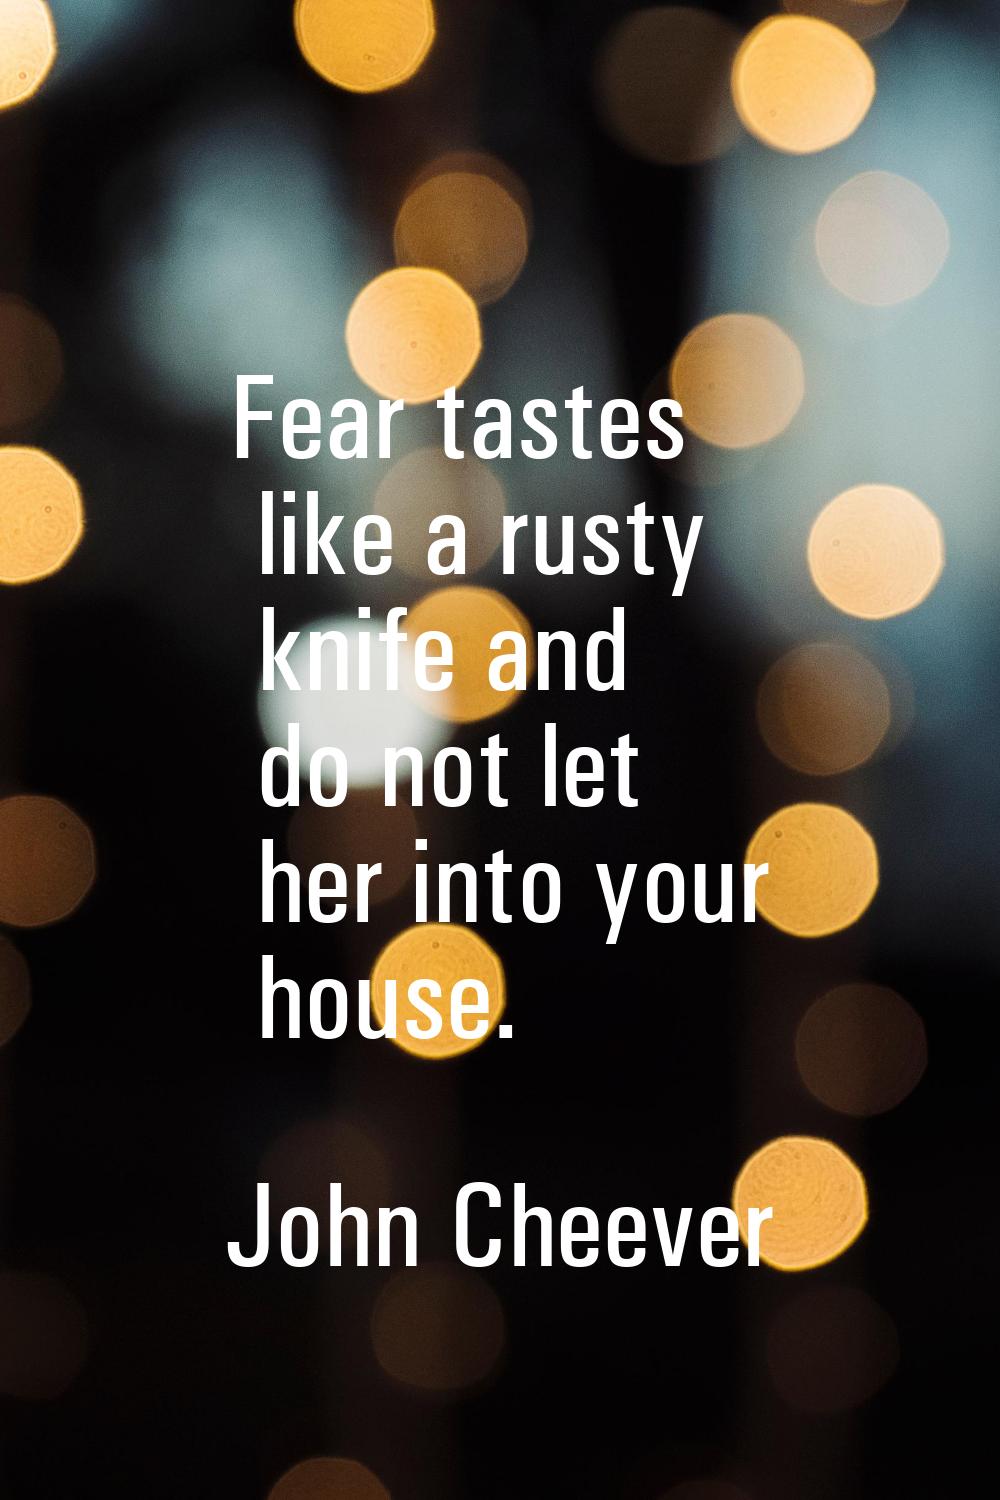 Fear tastes like a rusty knife and do not let her into your house.